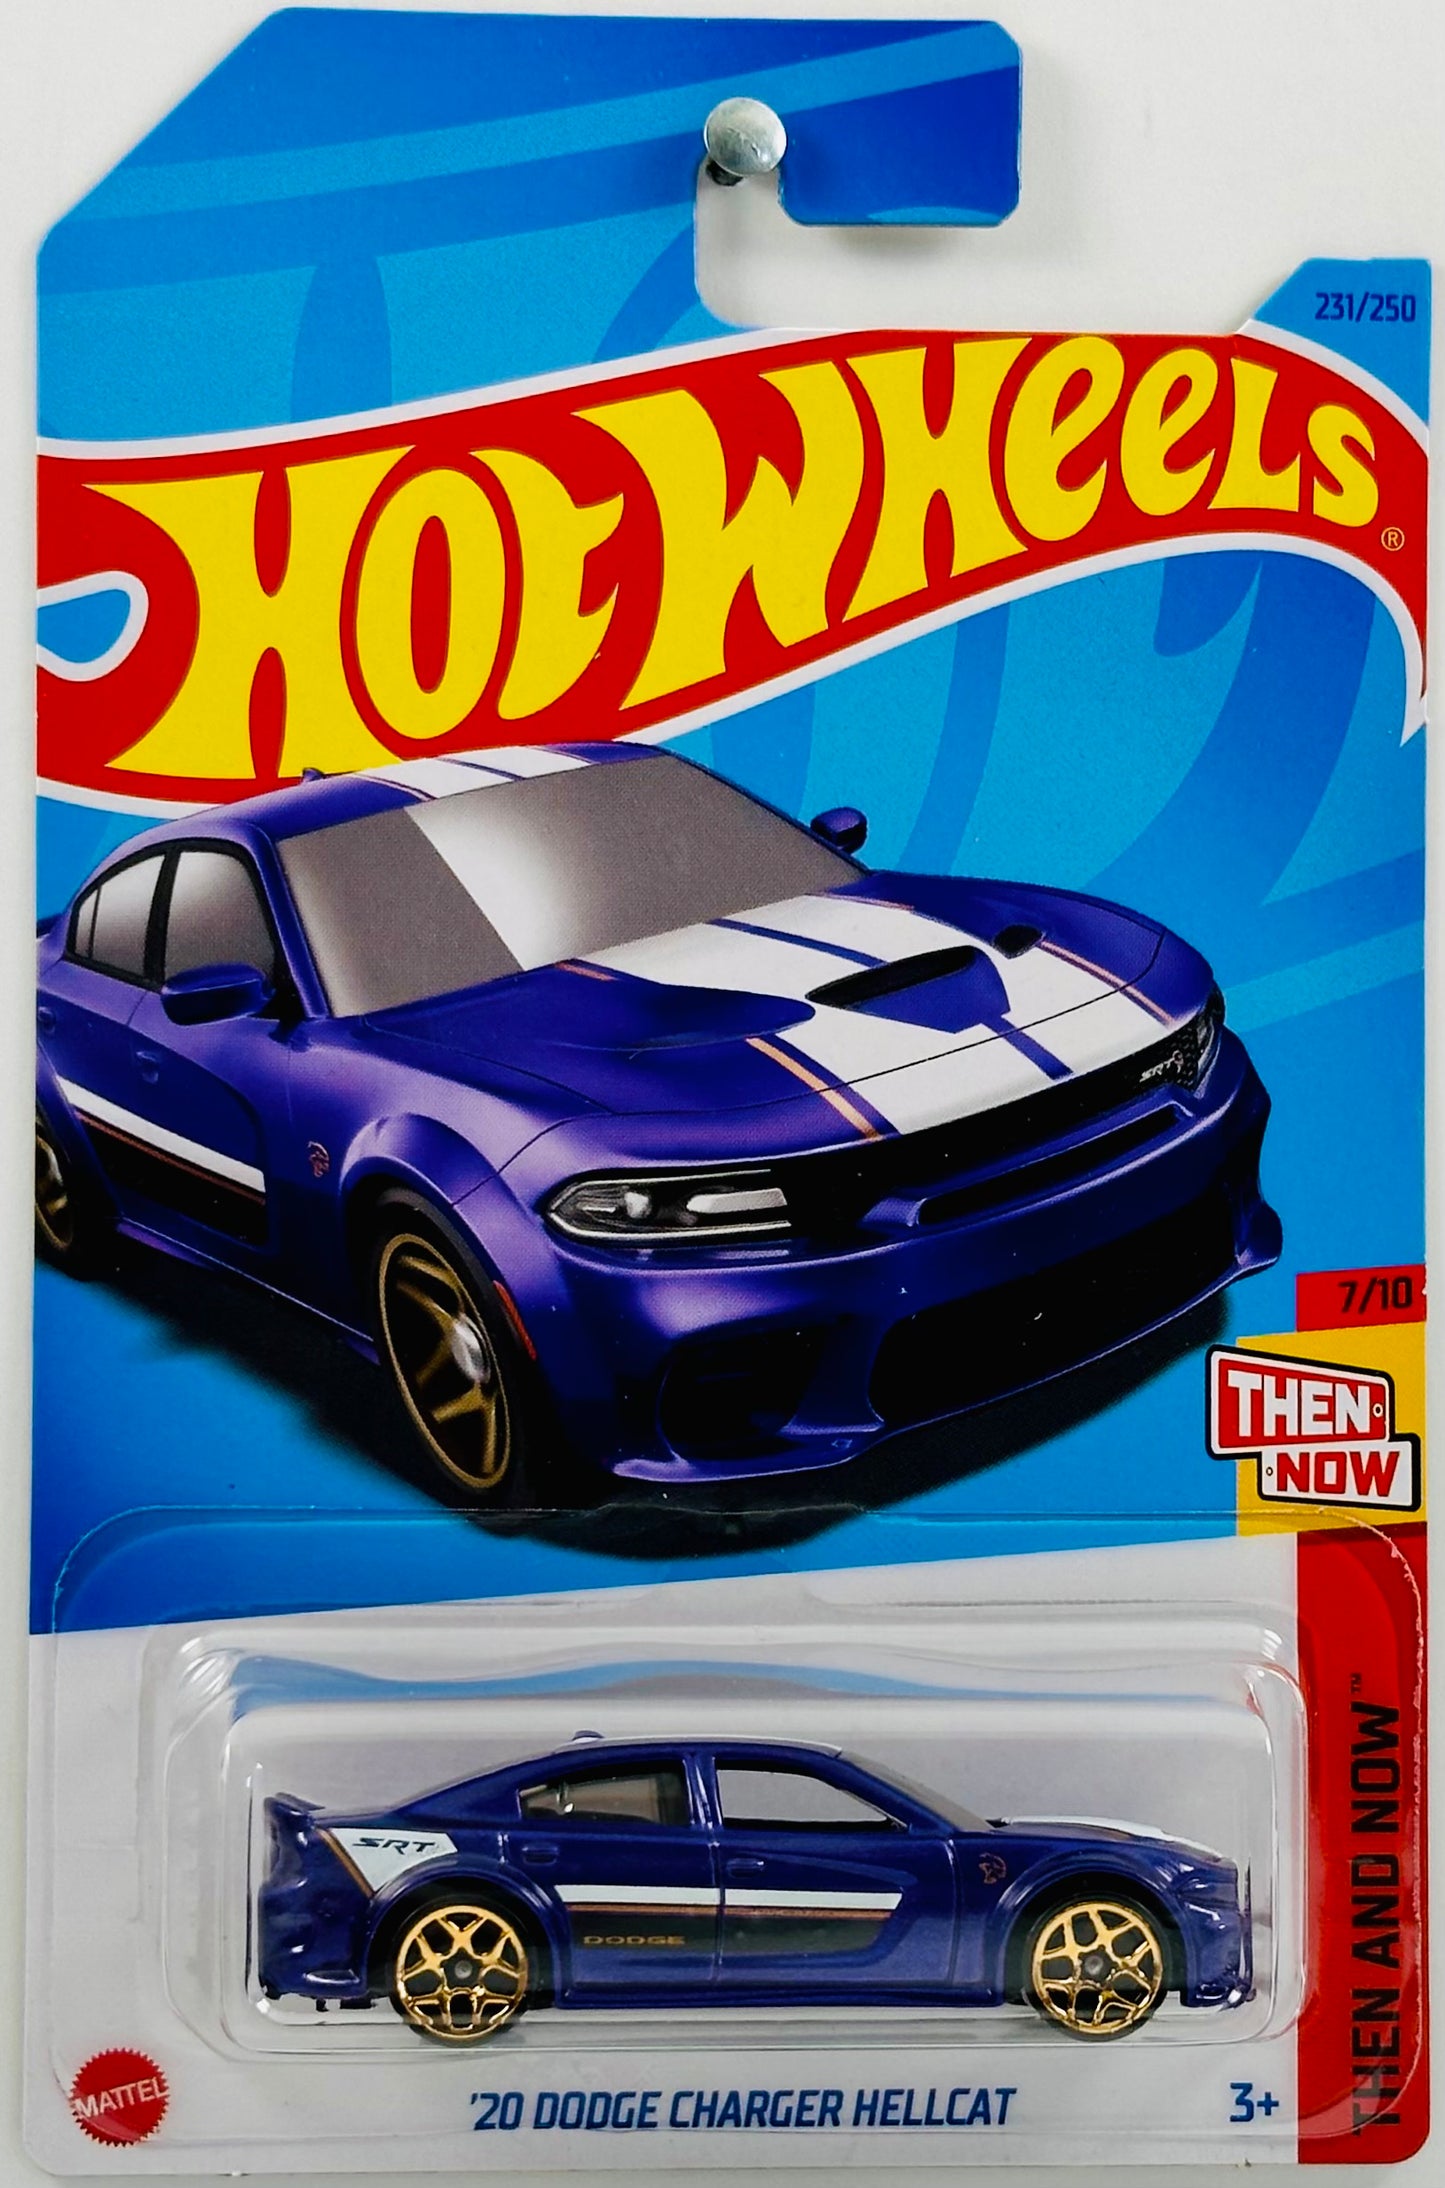 Hot Wheels 2023 - Collector # 231/250 - Then And Now 07/10 - '20 Dodge Charger Hellcat - Metalflake Purple - IC